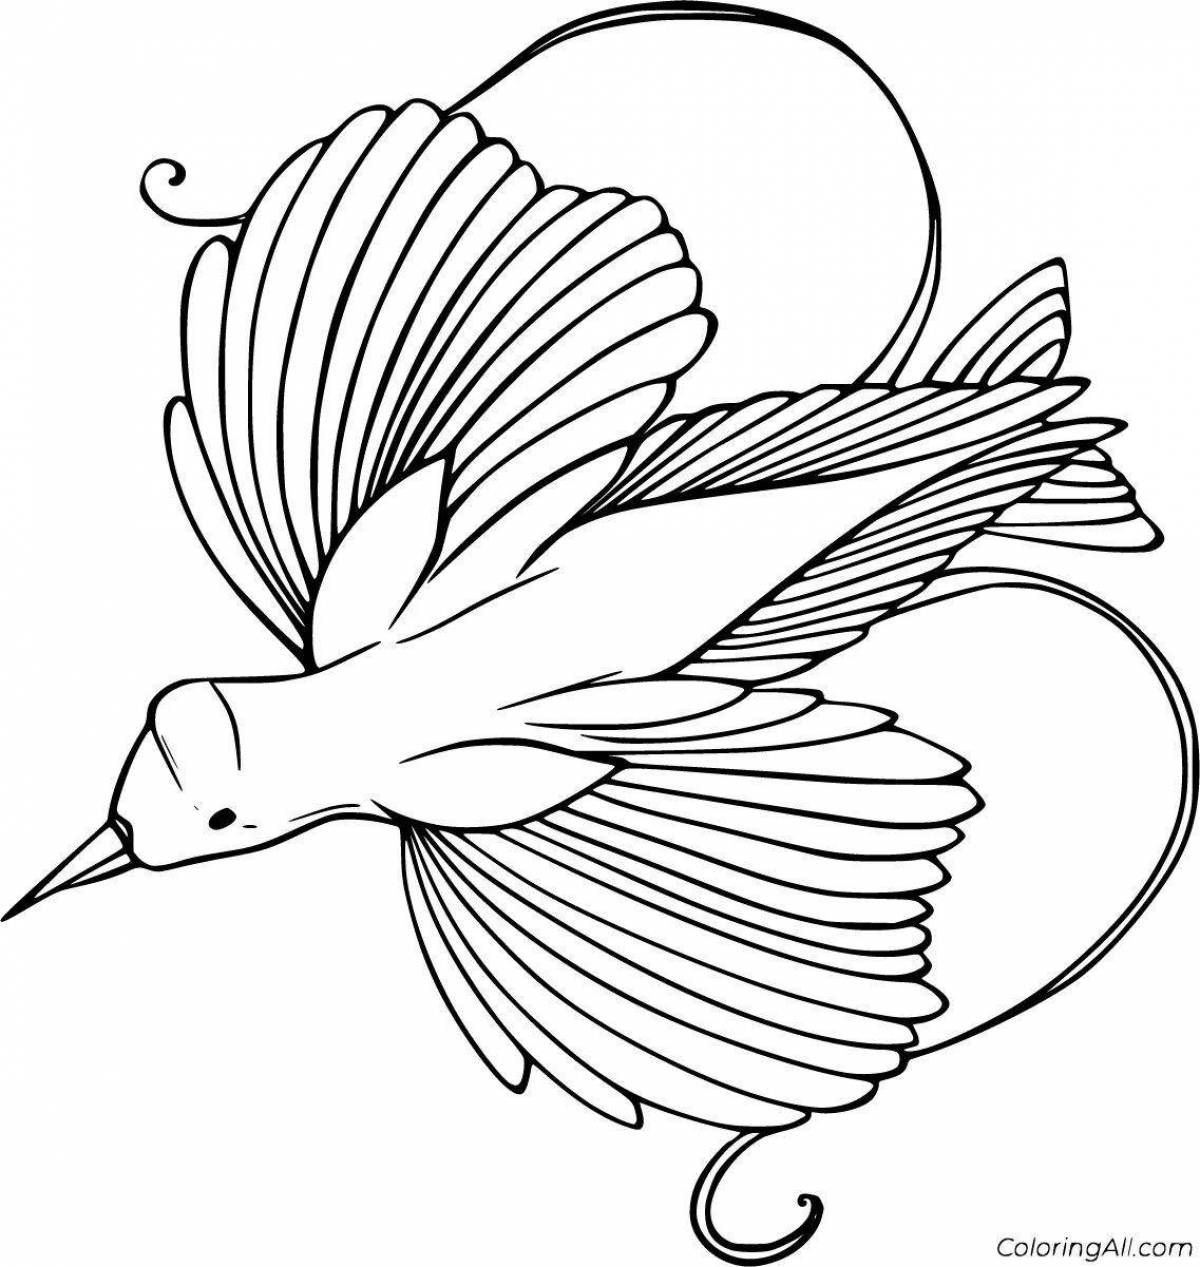 Charming birds of paradise coloring book